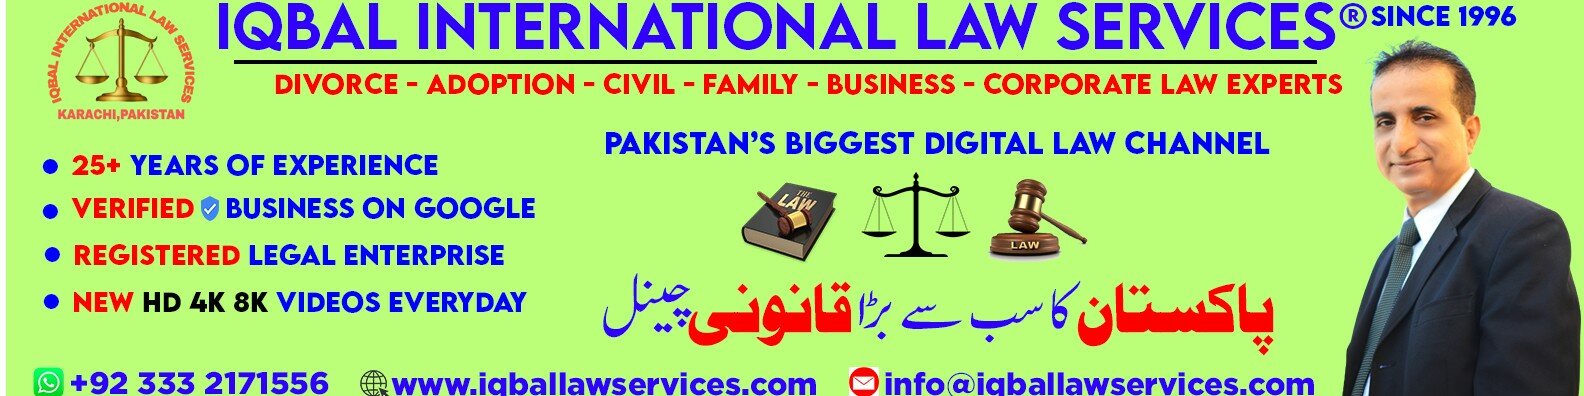 Iqbal International Law Services cover photo